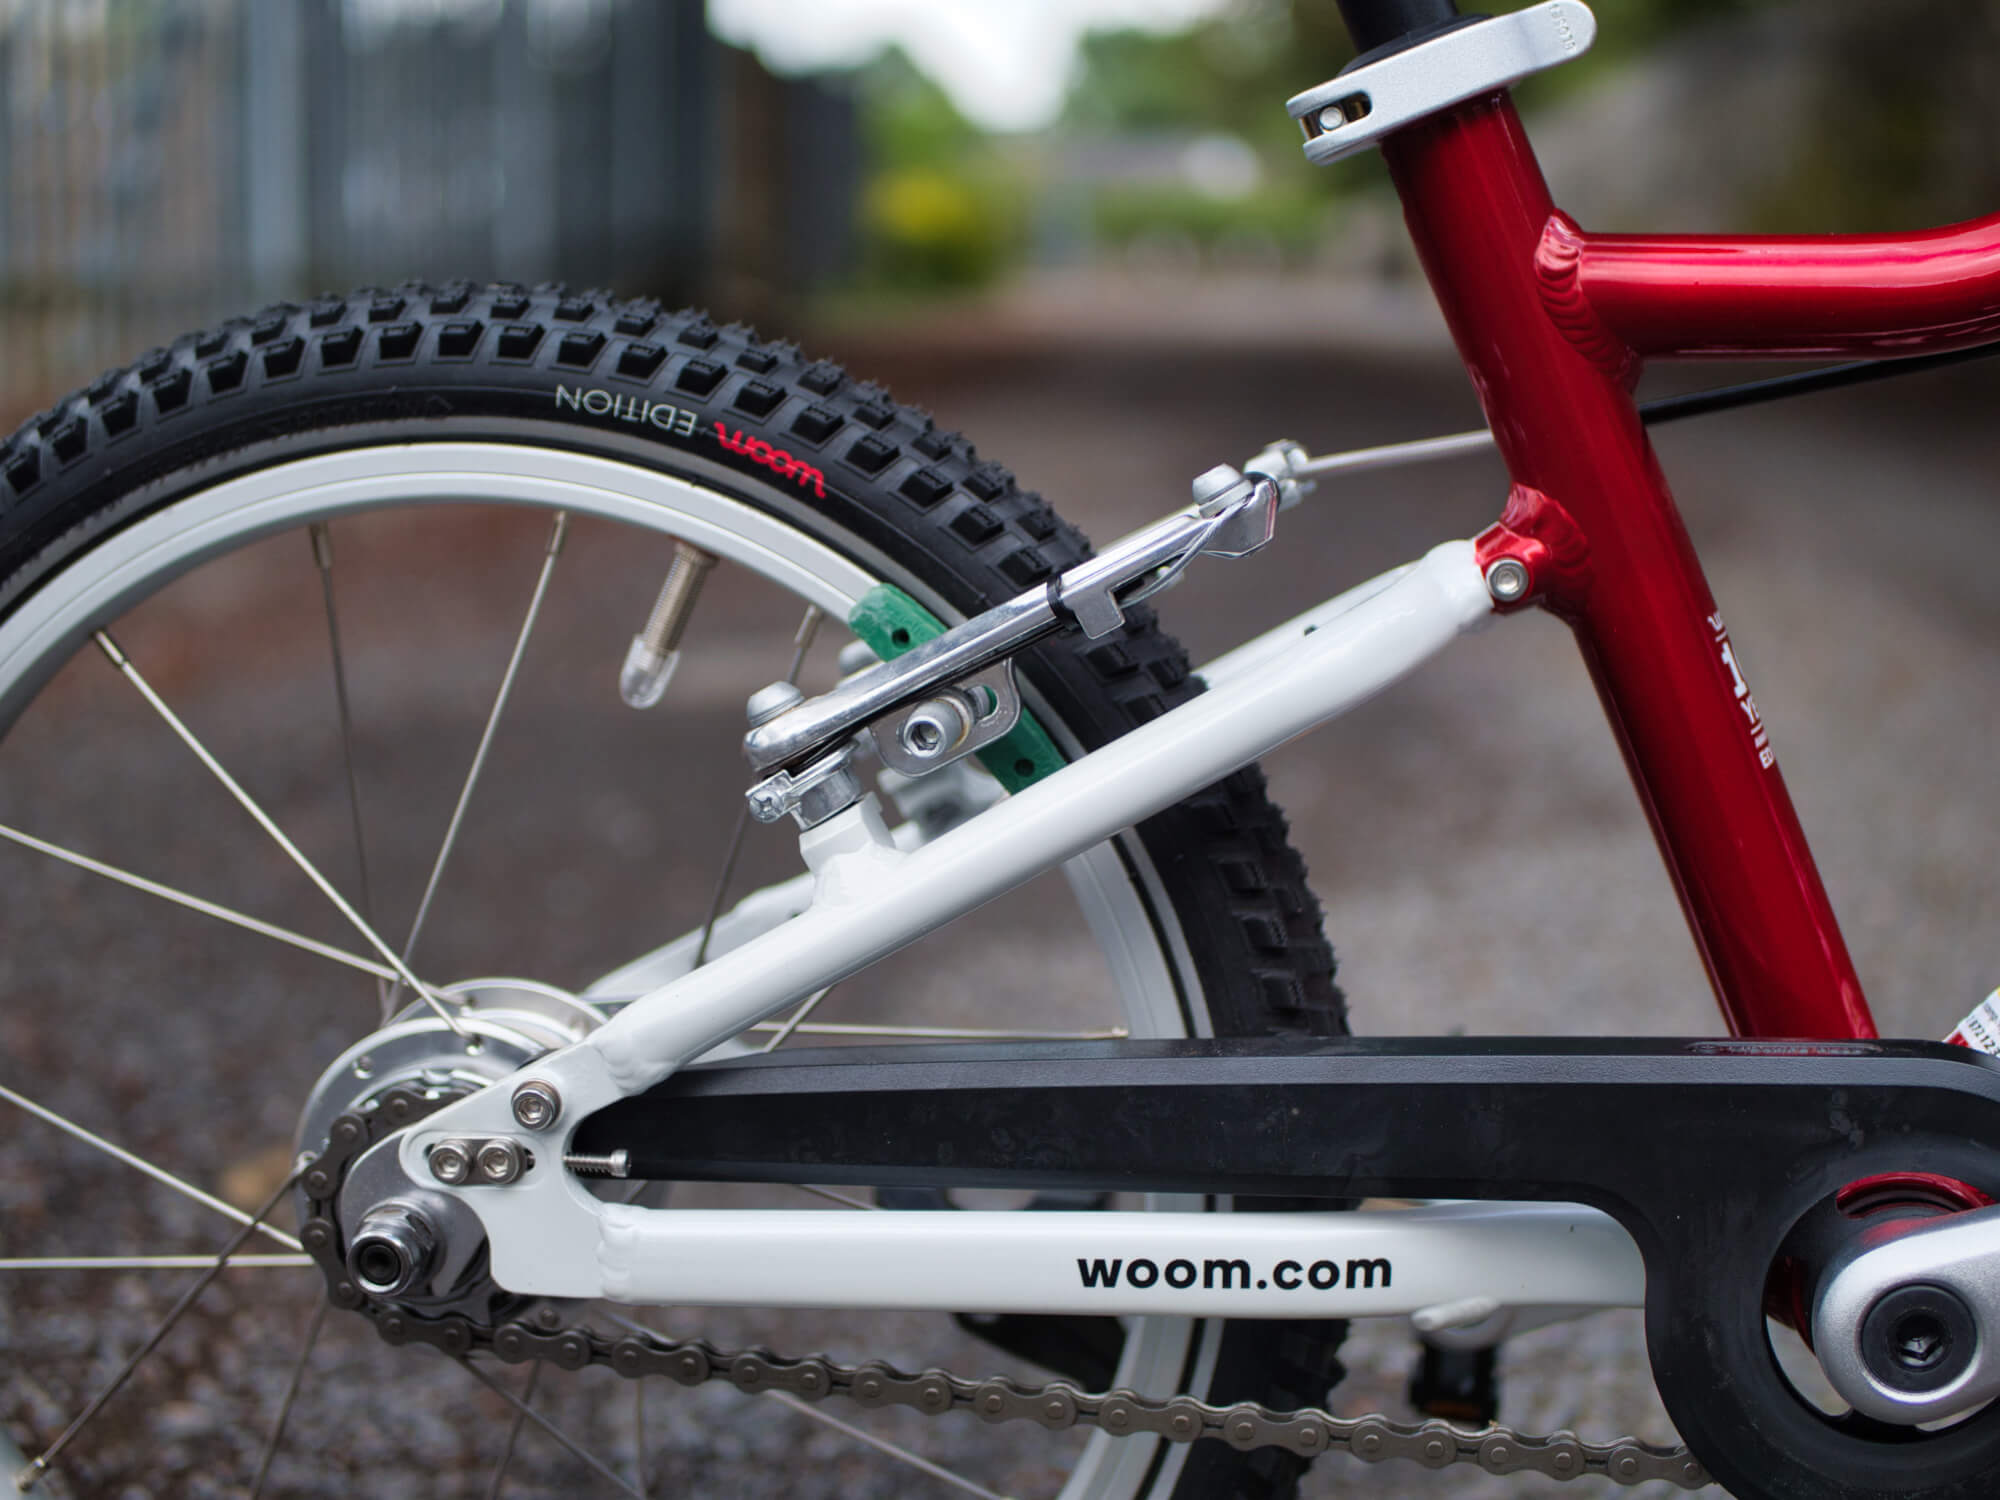 First impressions review of the woom 3 kids bike - automagic